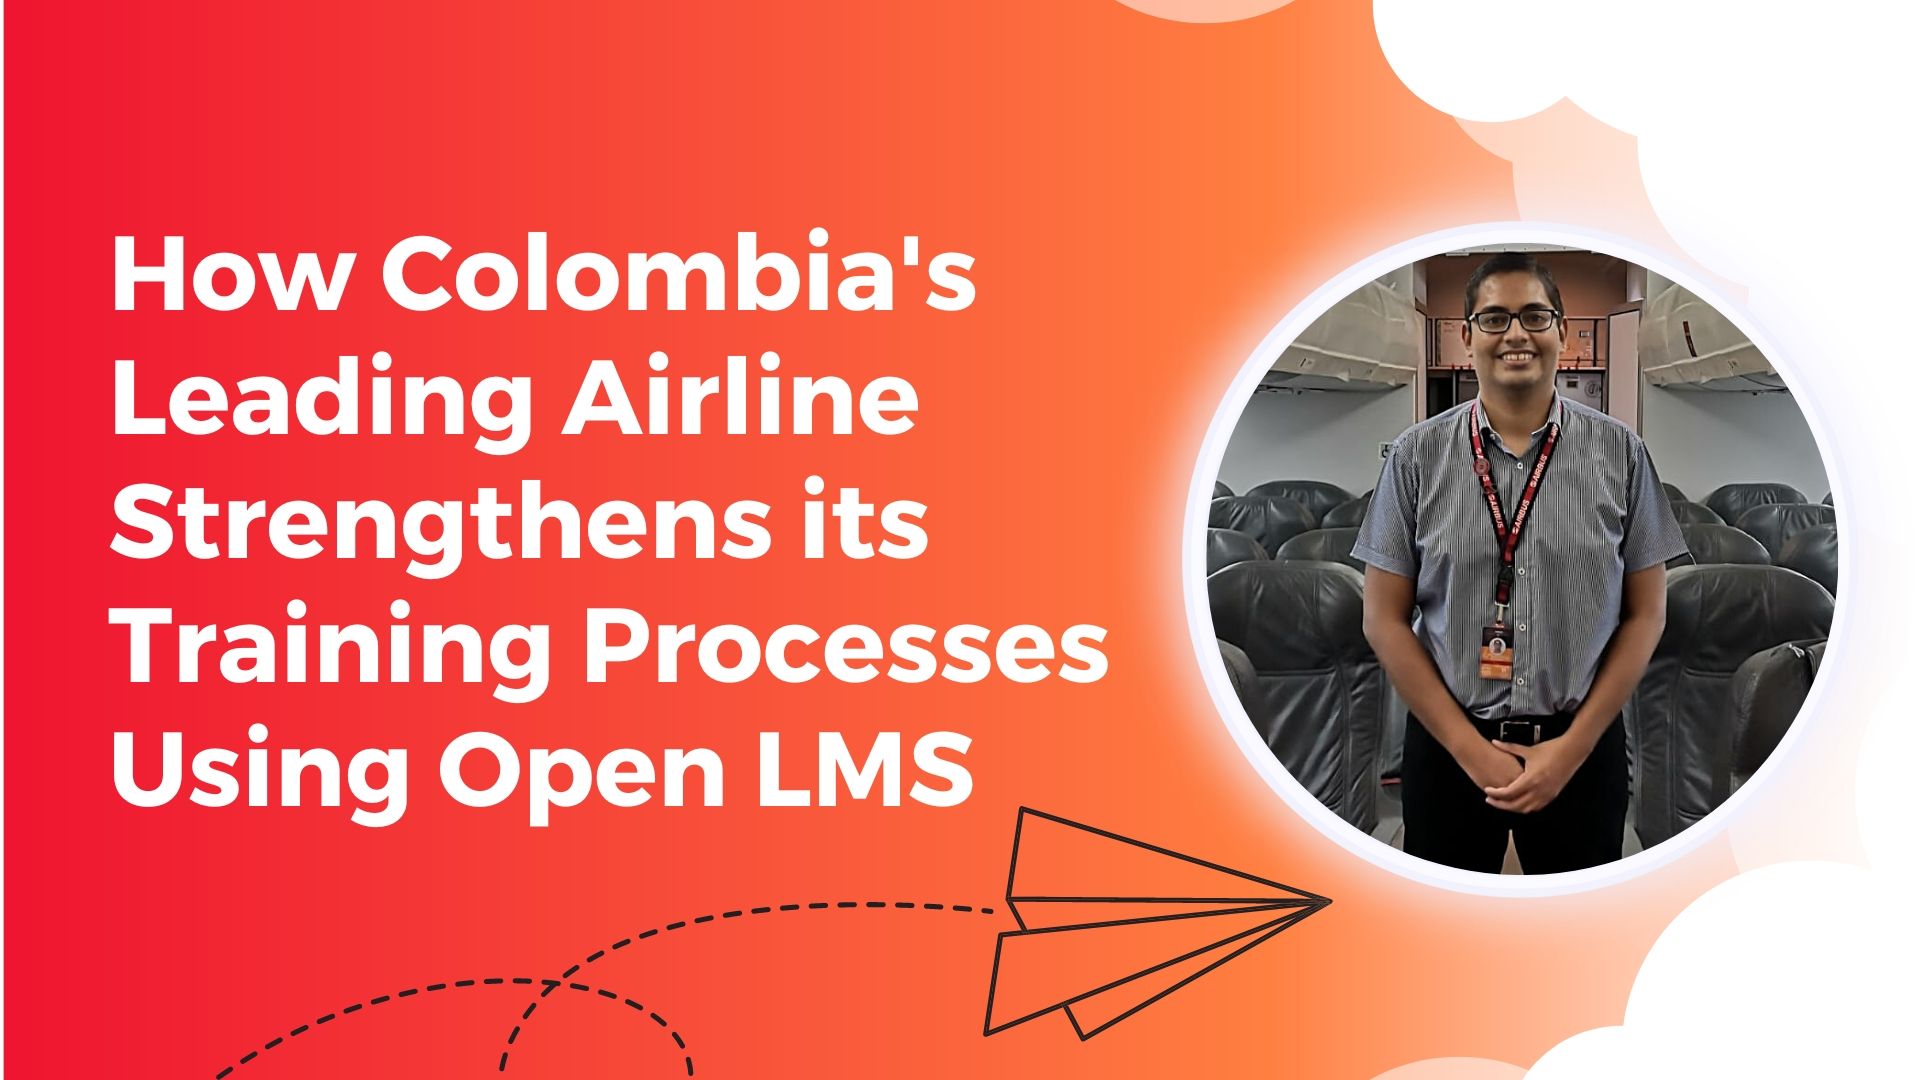 How Colombia's Leading Airline Strengthens its Training Processes Using Open LMS